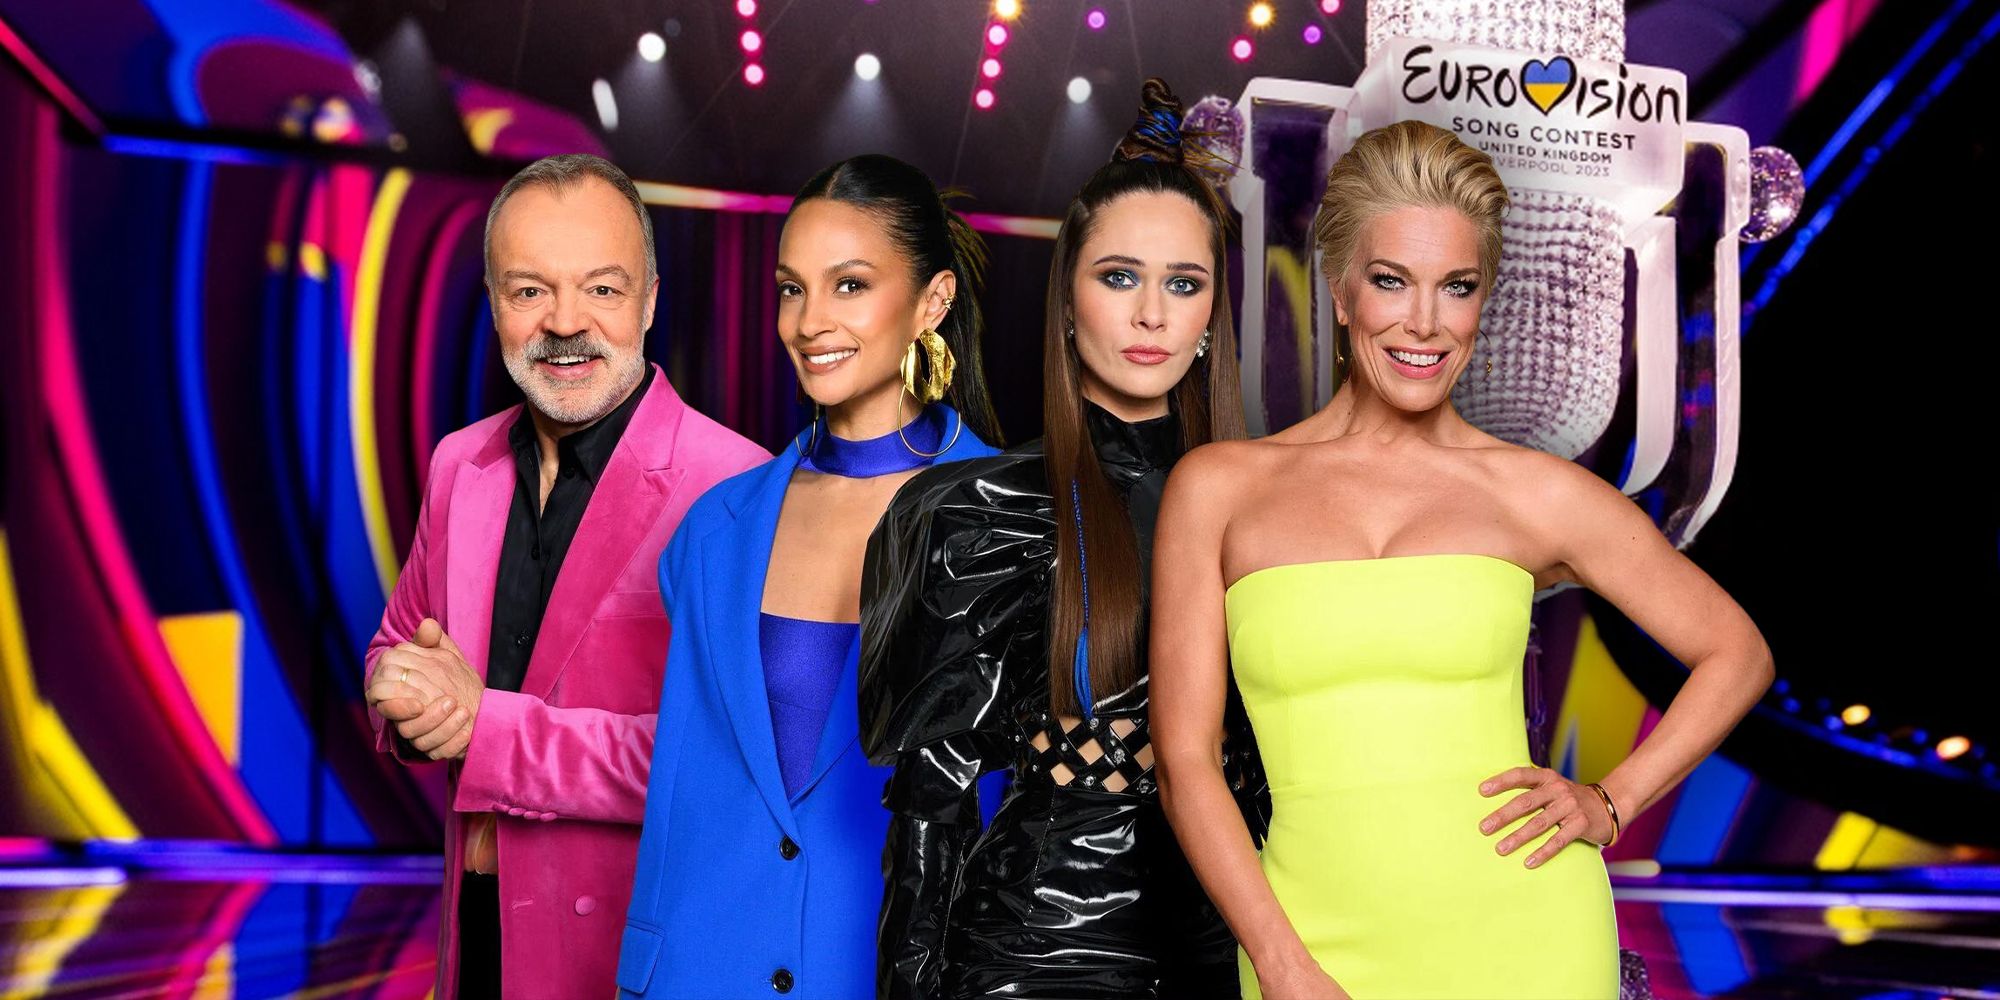 Eurovision Song Contest Power Ranking Who Is Most Likely To Win?